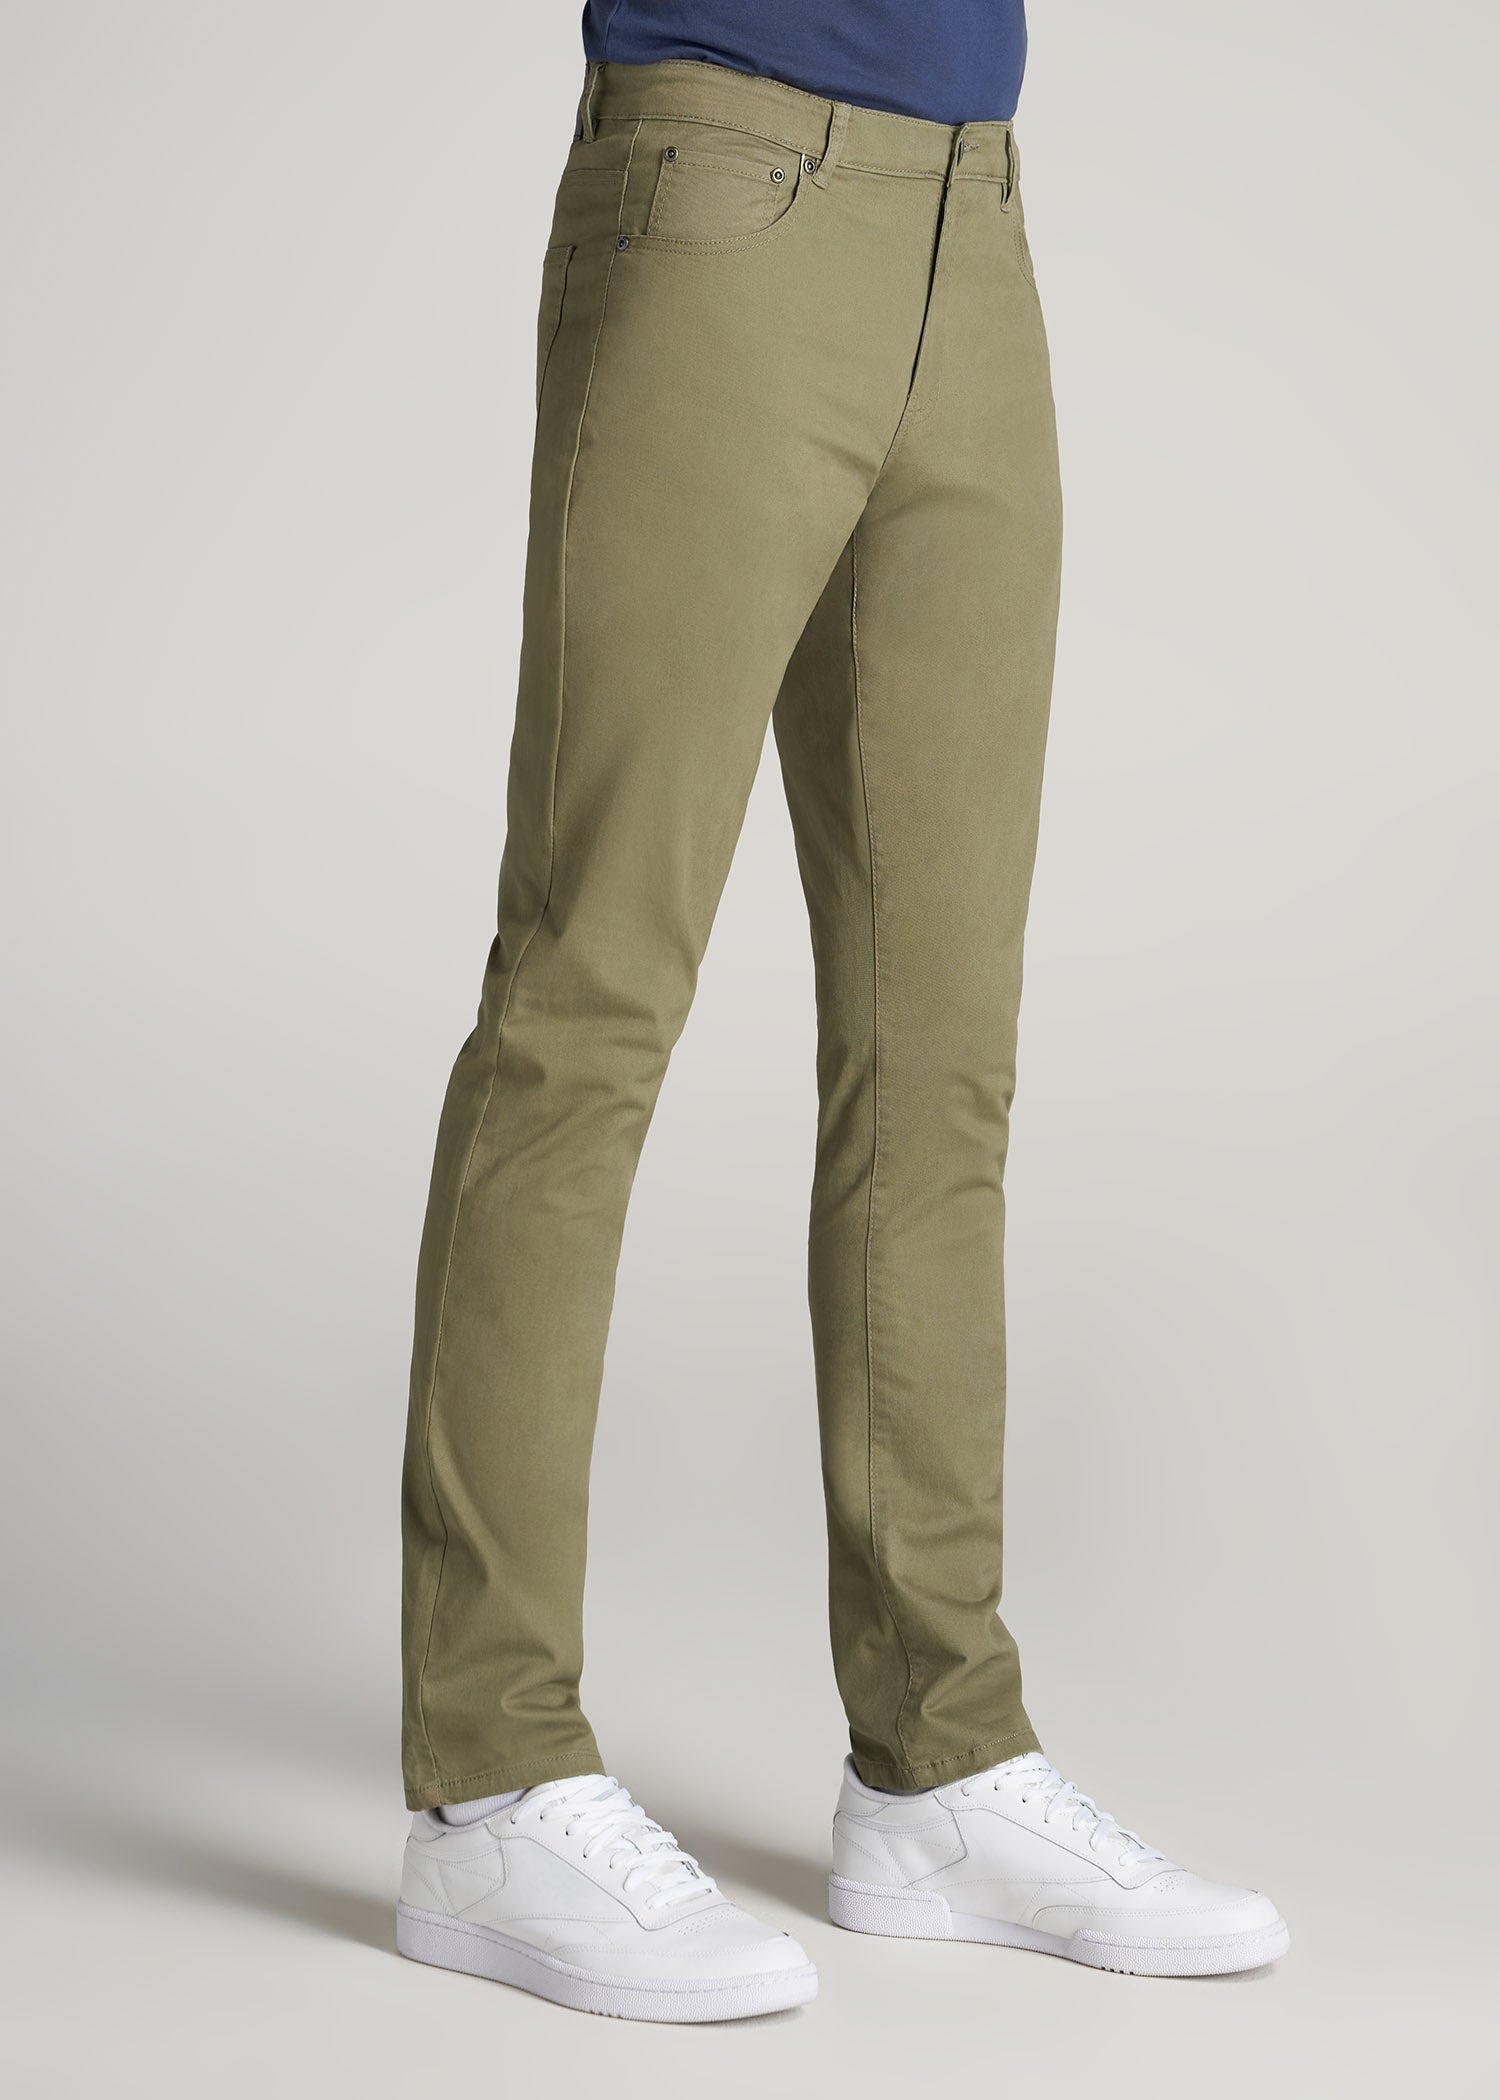 Carman TAPERED Fit Five Pocket Pants for Tall Men in Fatigue Green